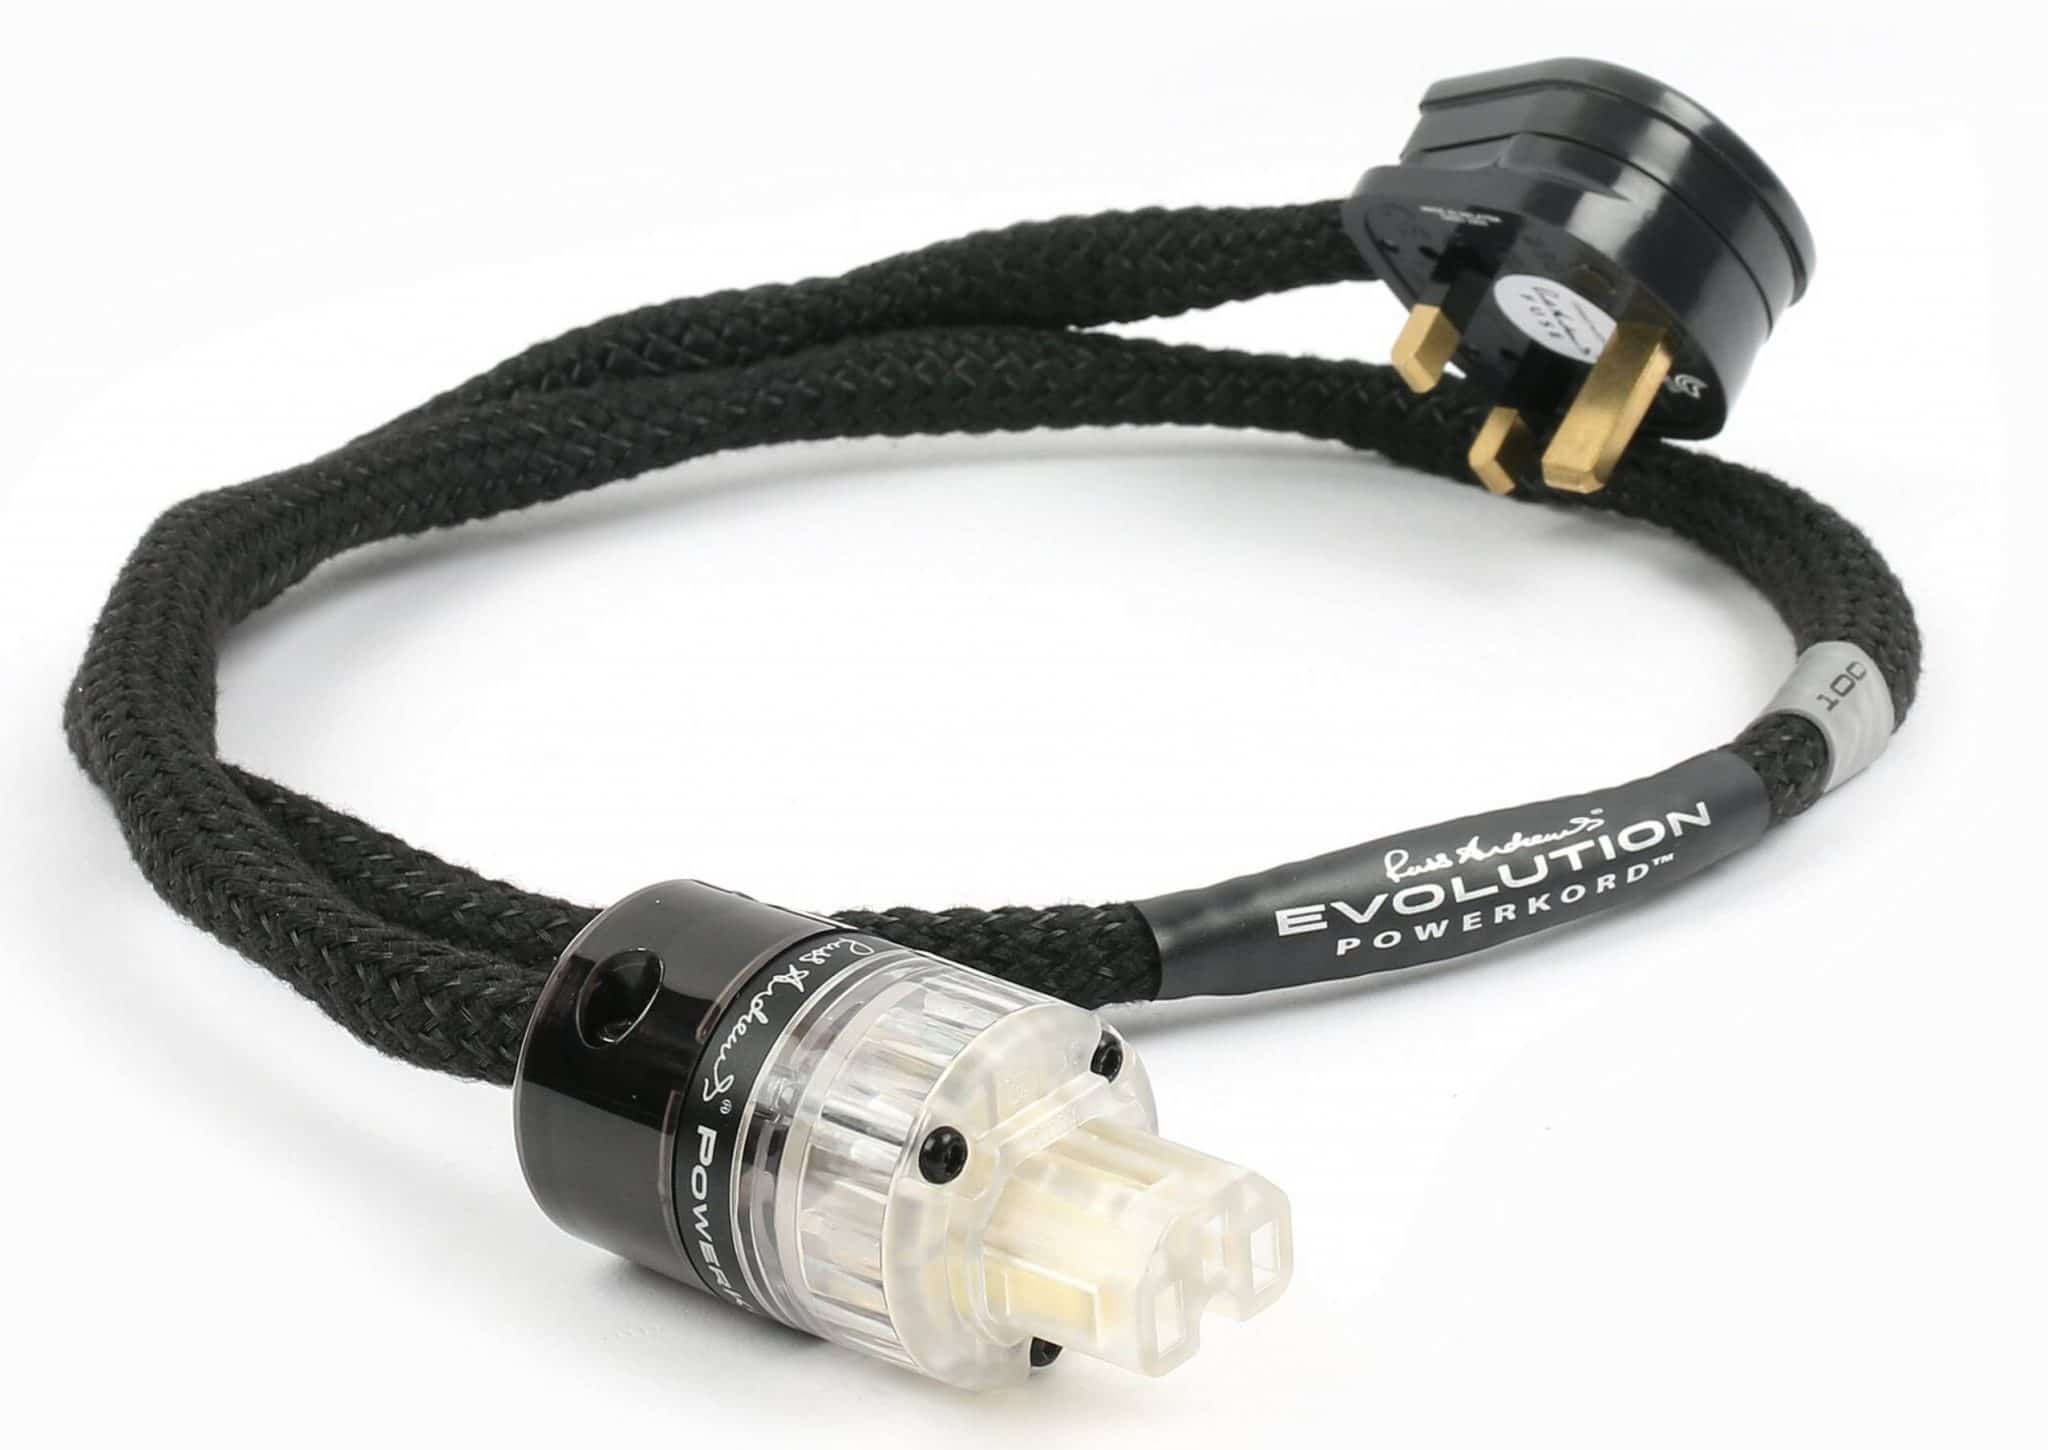 Evolution PowerKord Mains Cables From Russ Andrews